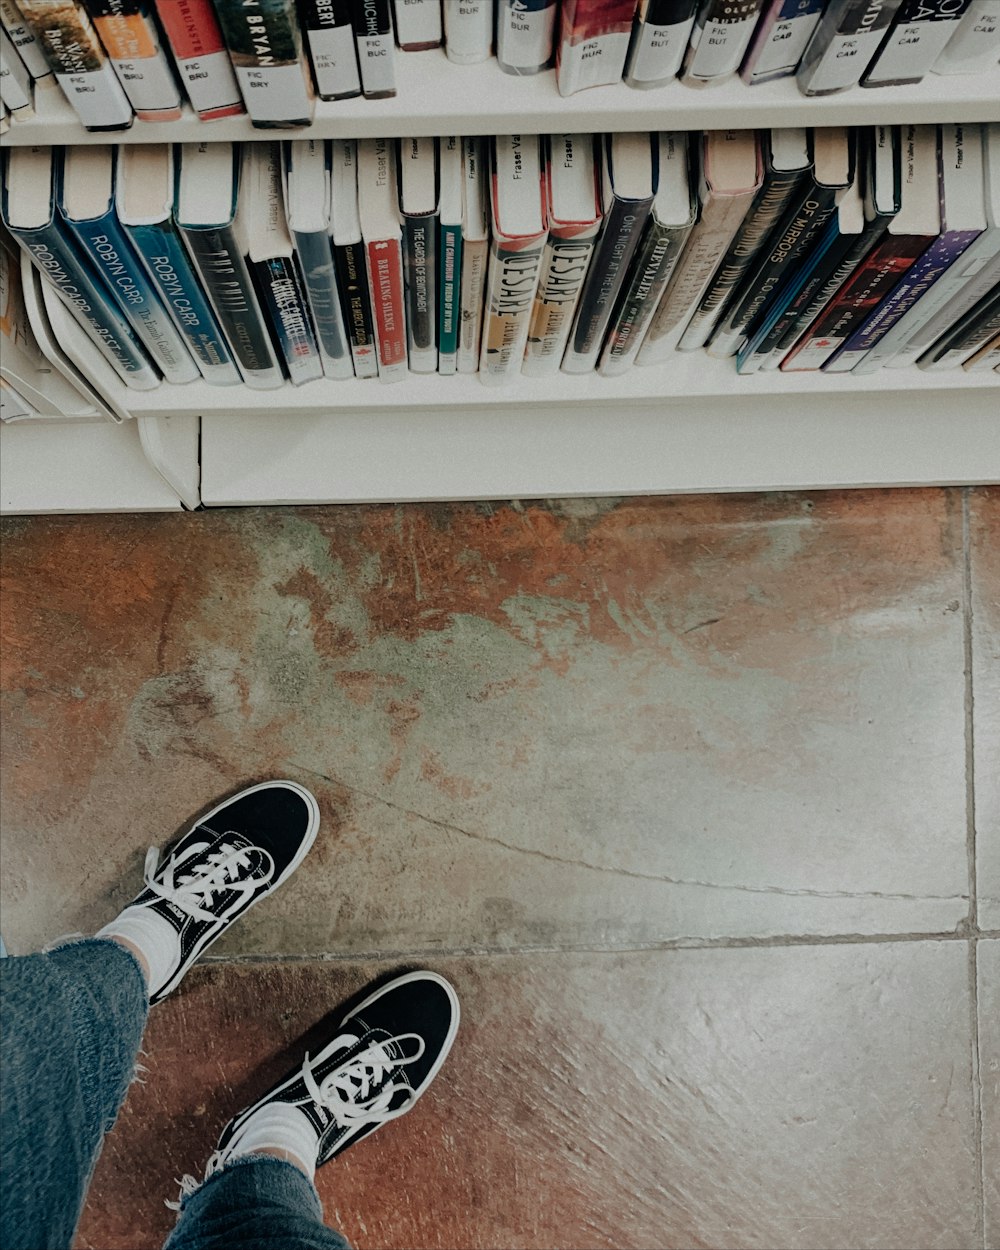 a person's feet on a shelf with books on it